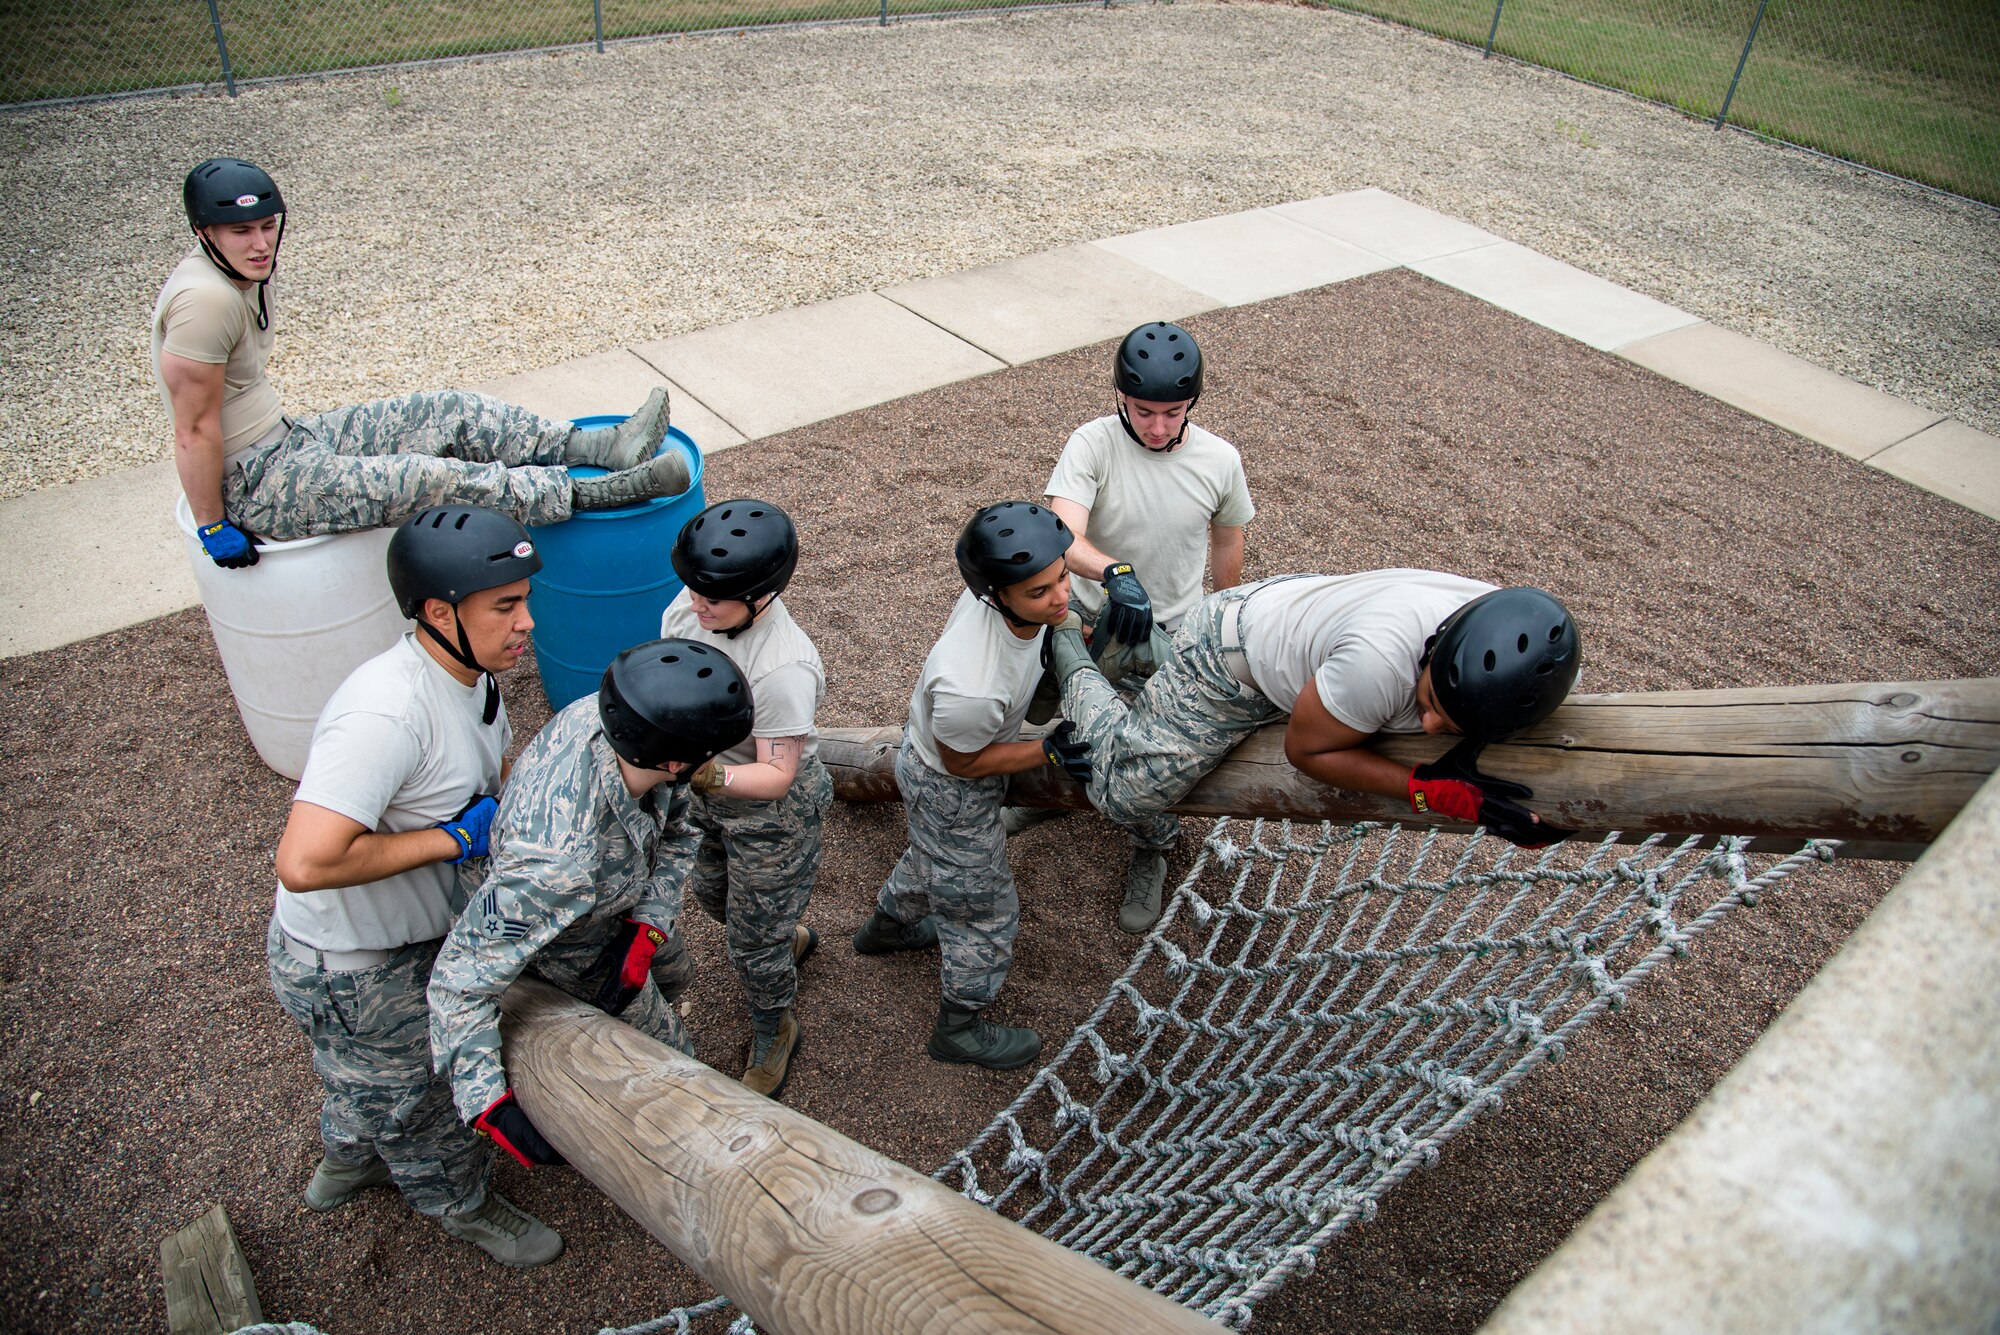 Wisconsin Air National Guard junior enlisted Airmen navigate through the leadership development course July 26, 2018, at Volk Field Air National Guard Base, Wisconsin. The Airmen were participants of the 2018 Junior Enlisted Orientation Program which allows junior enlisted Airmen to better understand the mission of all the units in the Wisconsin Air National Guard. 
(U.S. Air National Guard photo by Airman Cameron Lewis)